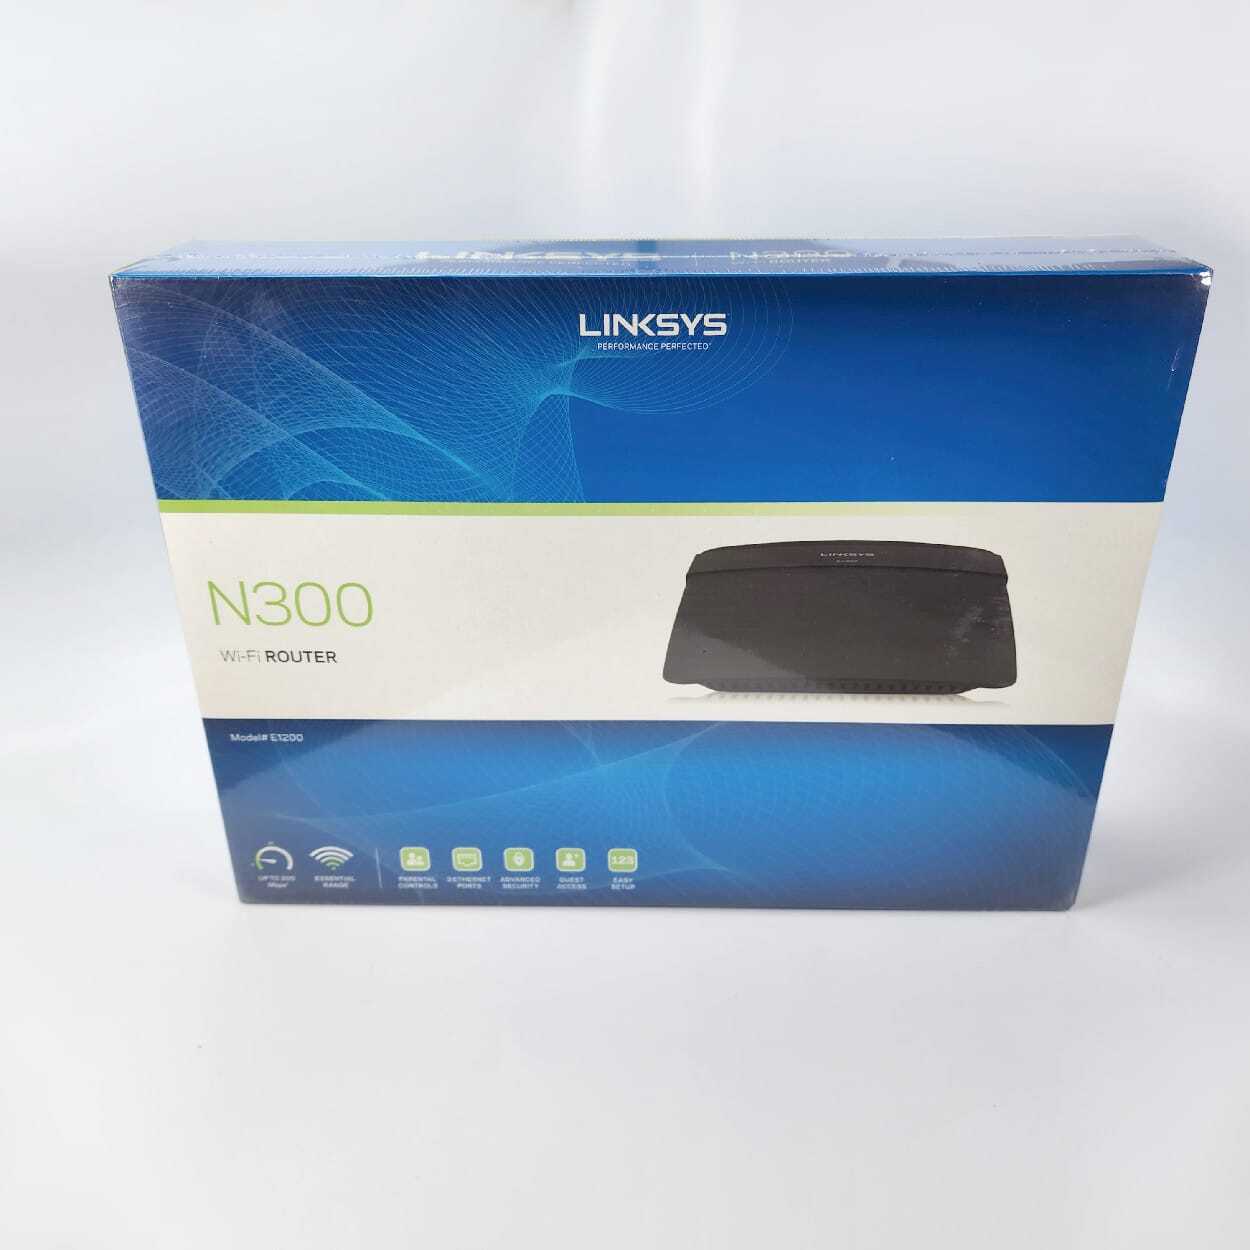 Linksys N300 WiFi Router - E1200-NP - Up To 300Mbps - New Sealed Box - 